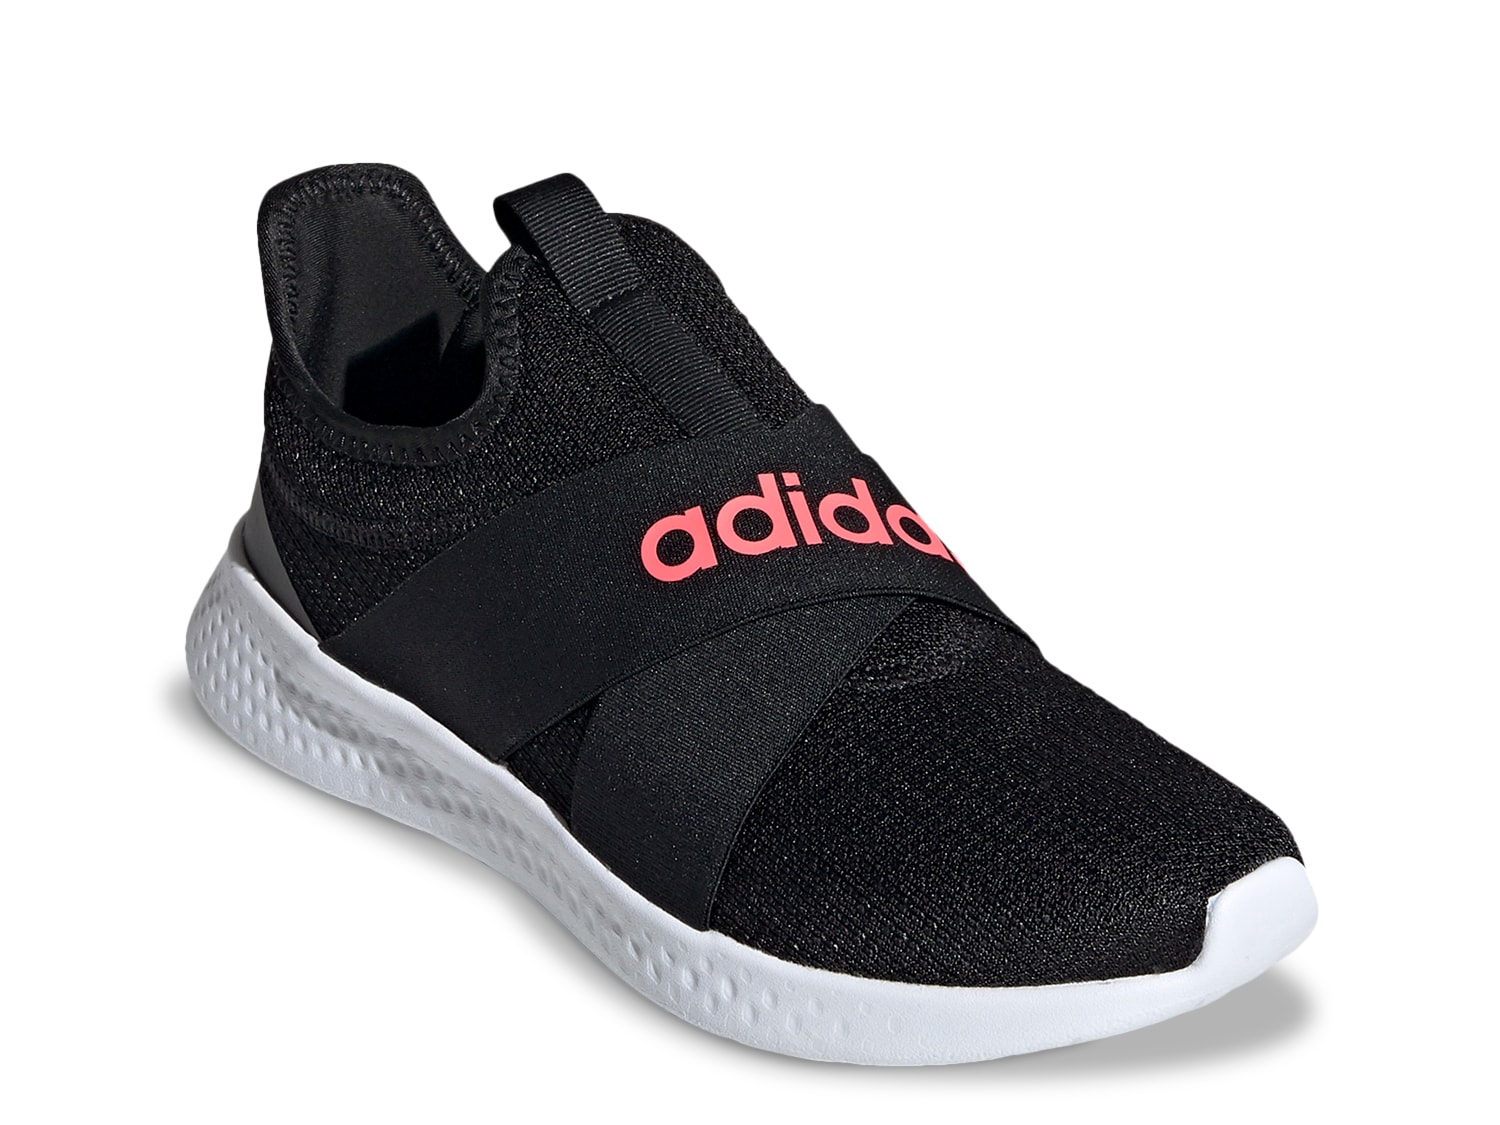 Adidas Shoes, Sneakers, Tennis Shoes 